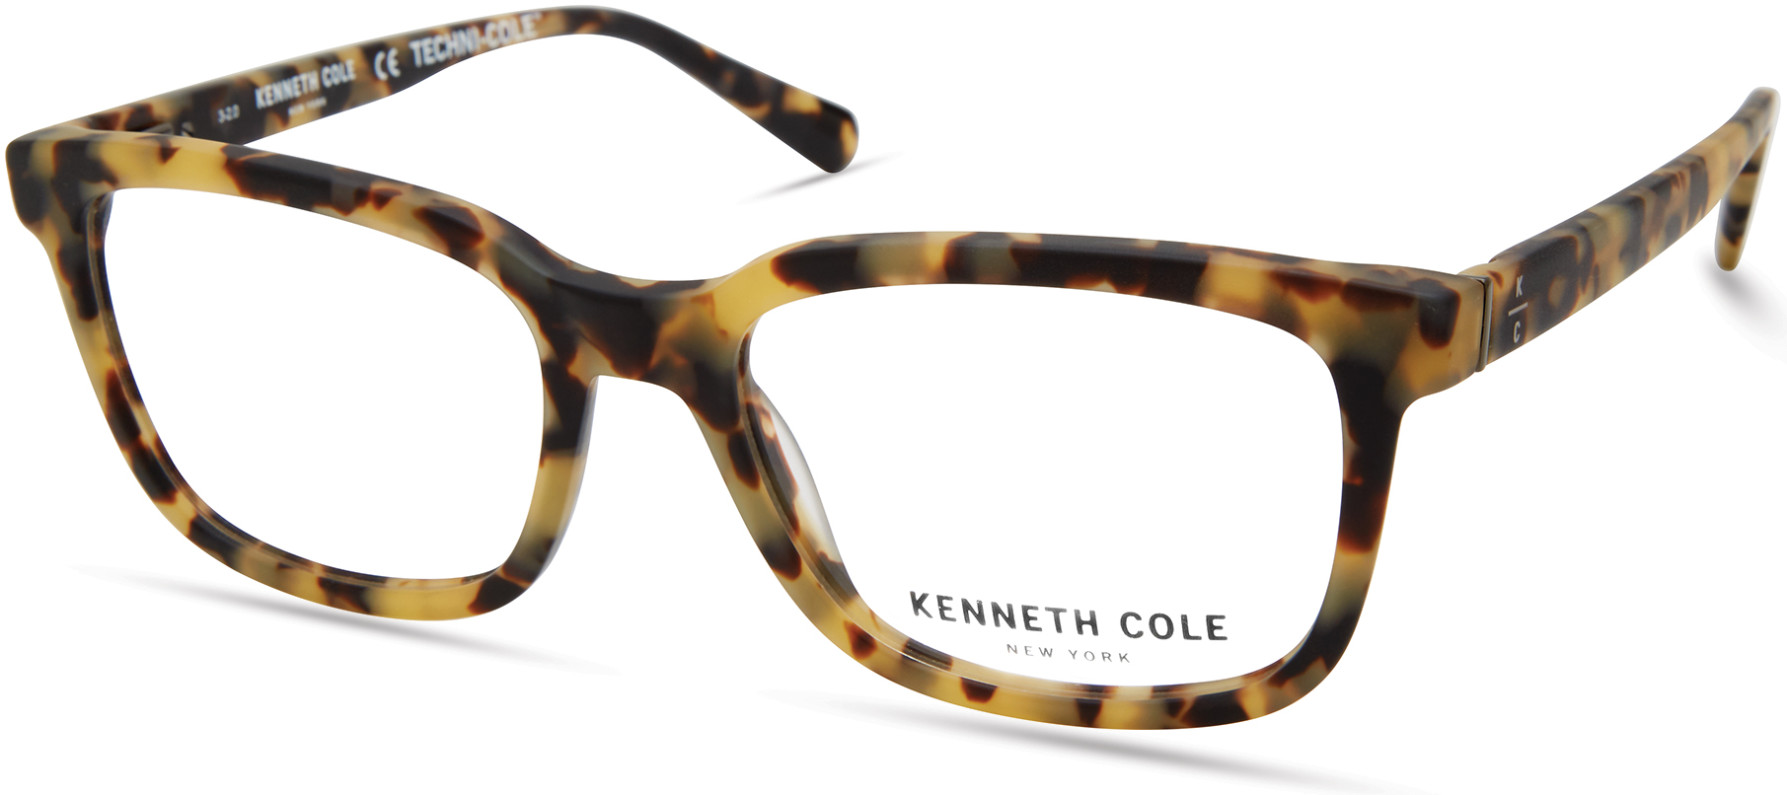 KENNETH COLE NY 0320 056